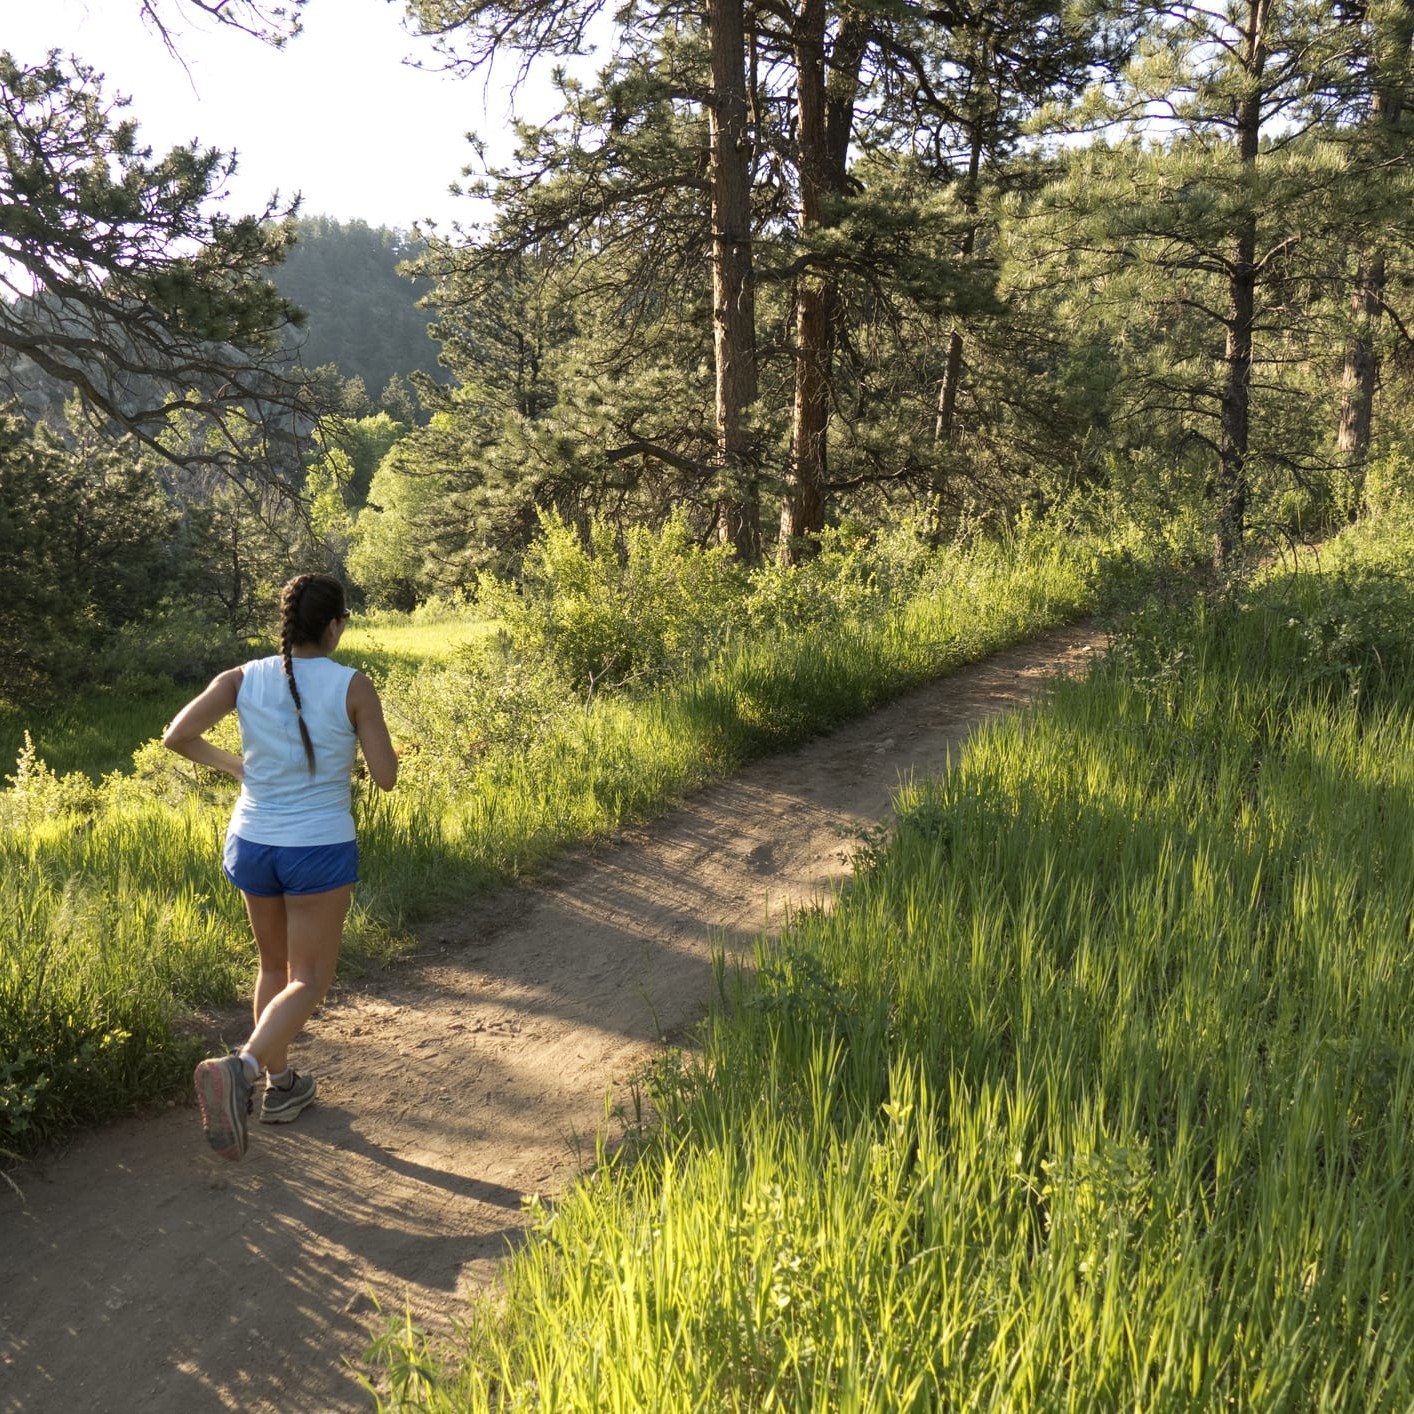 With the morning sun pouring through the pine forests of the Rocky Mountains, a young woman with a ponytail trail runs through the tall grass along the Bear Creek Trail just outside Kittredge, Colorado.